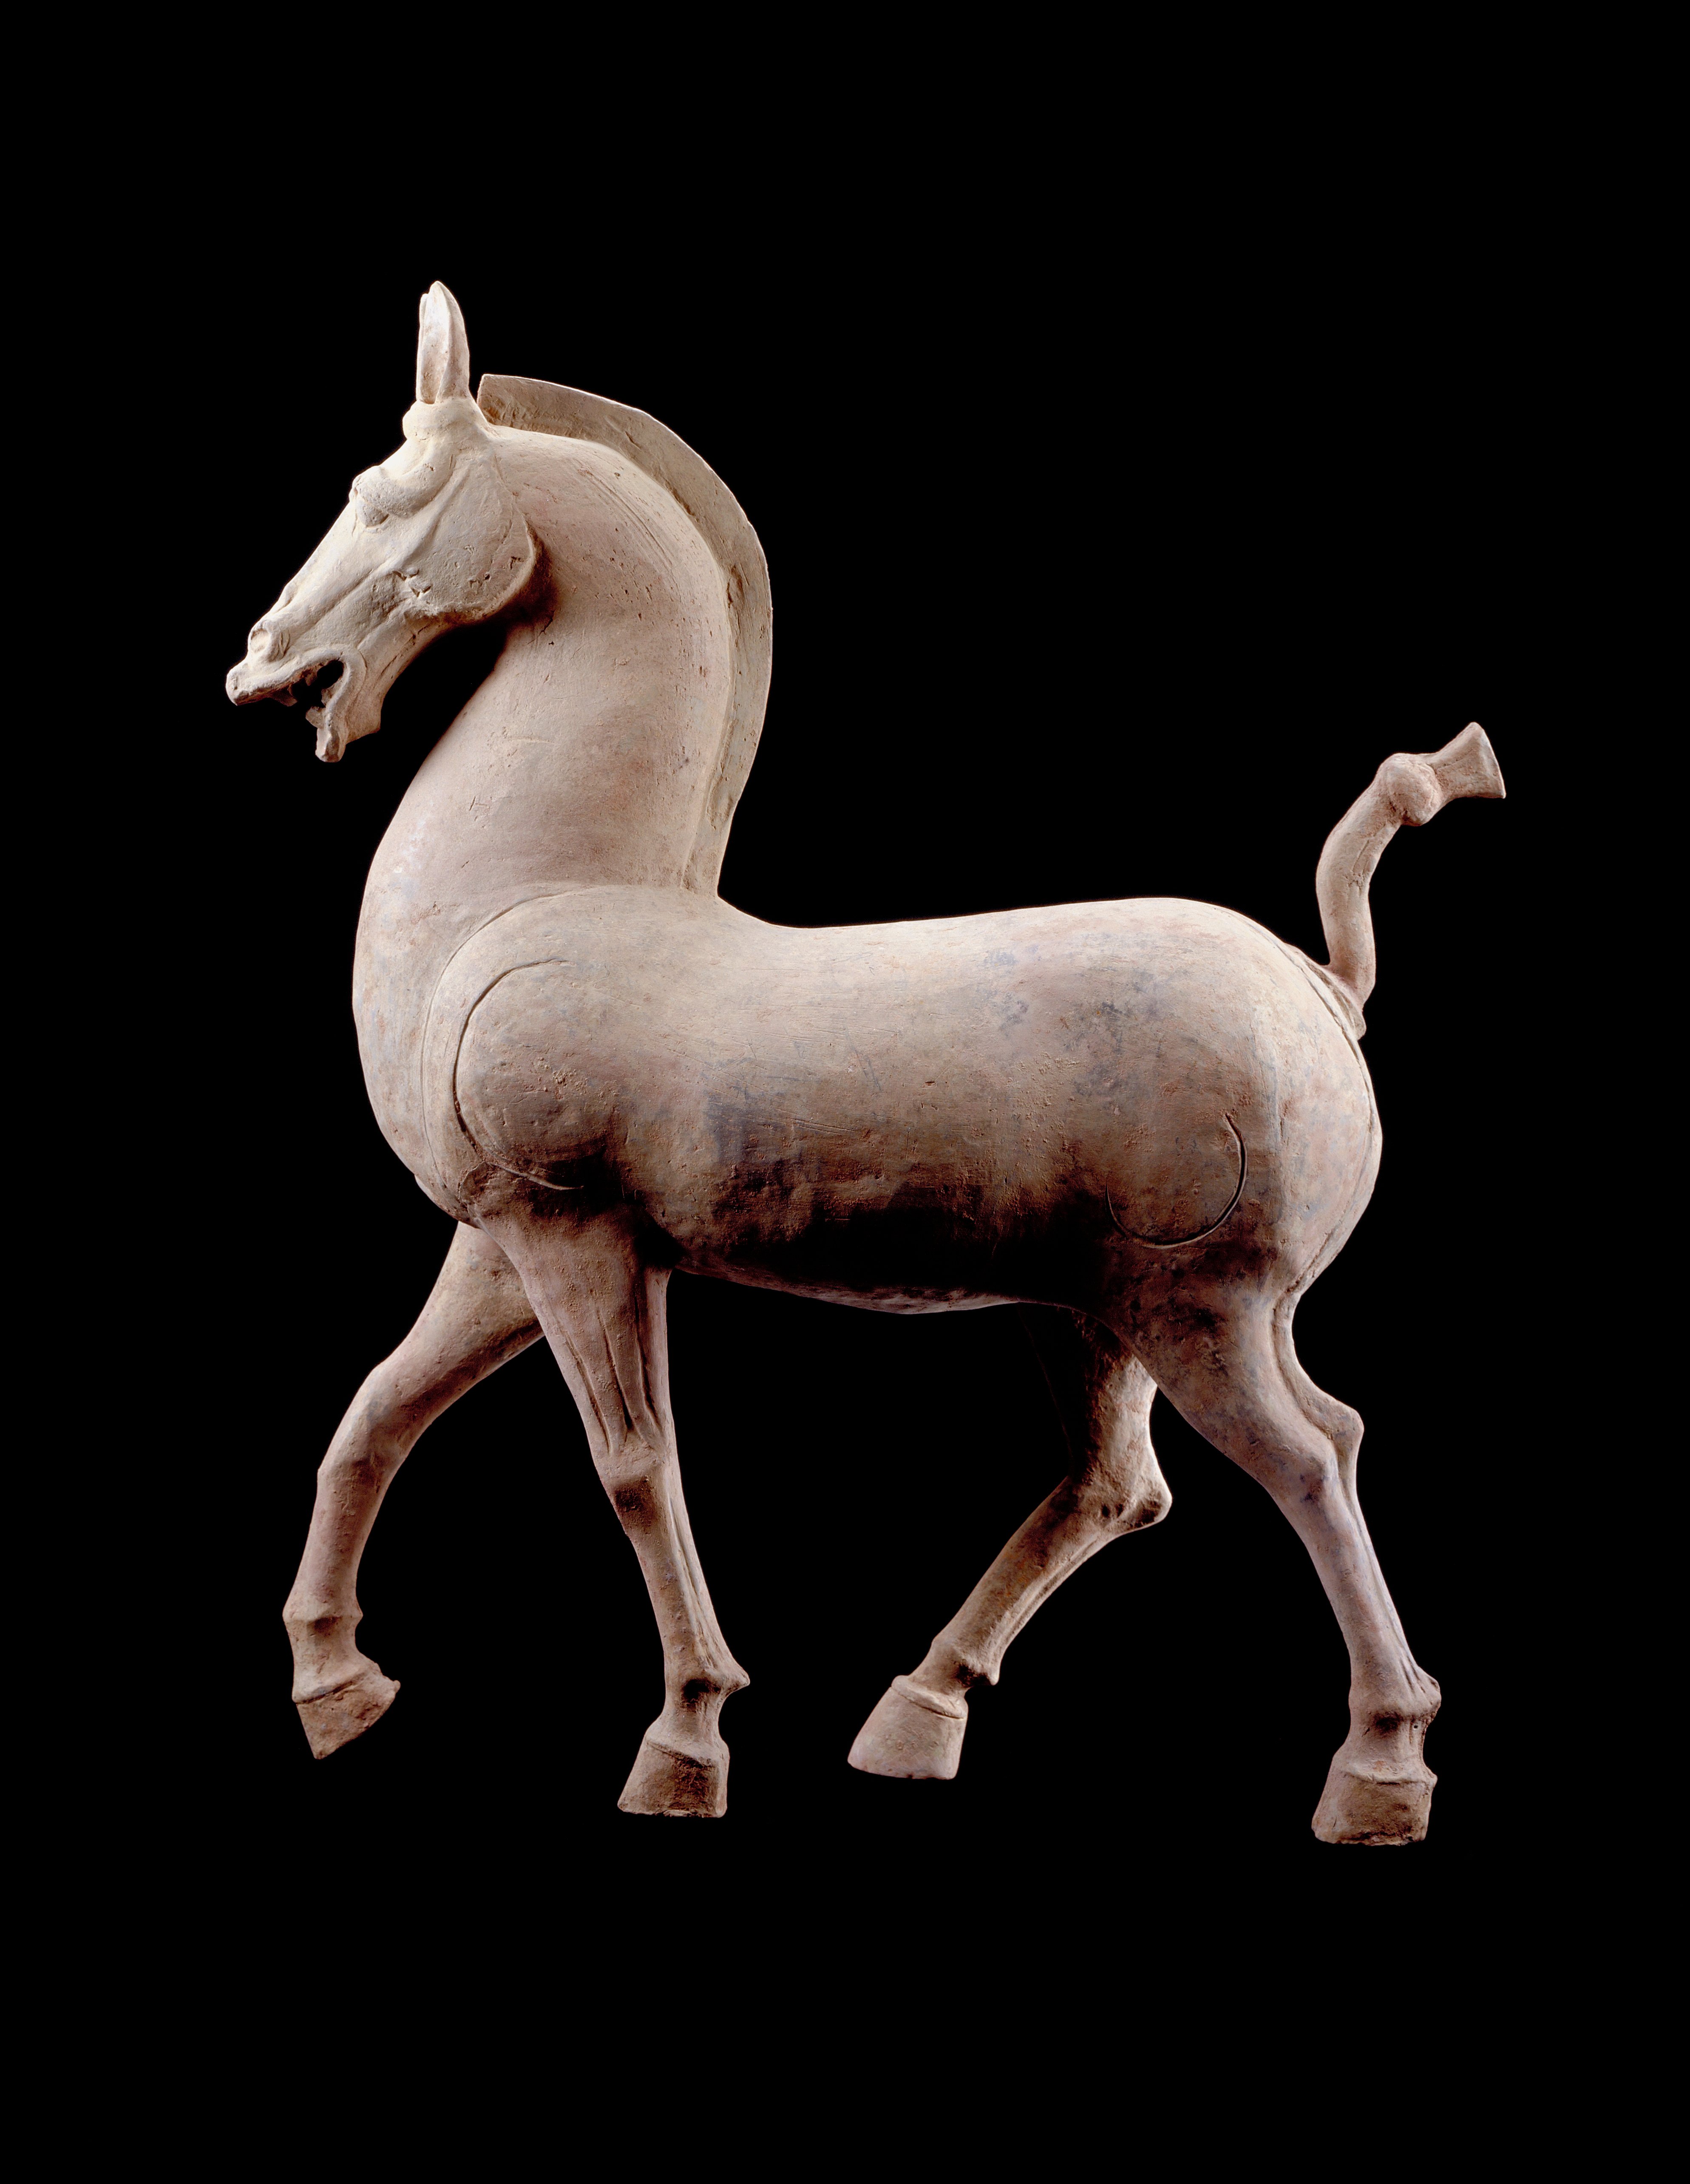 Prancing Horse by Unknown Artist - 1st-3rd century - 106.68 x 92.71 x 29.21 cm Minneapolis Institute of Art